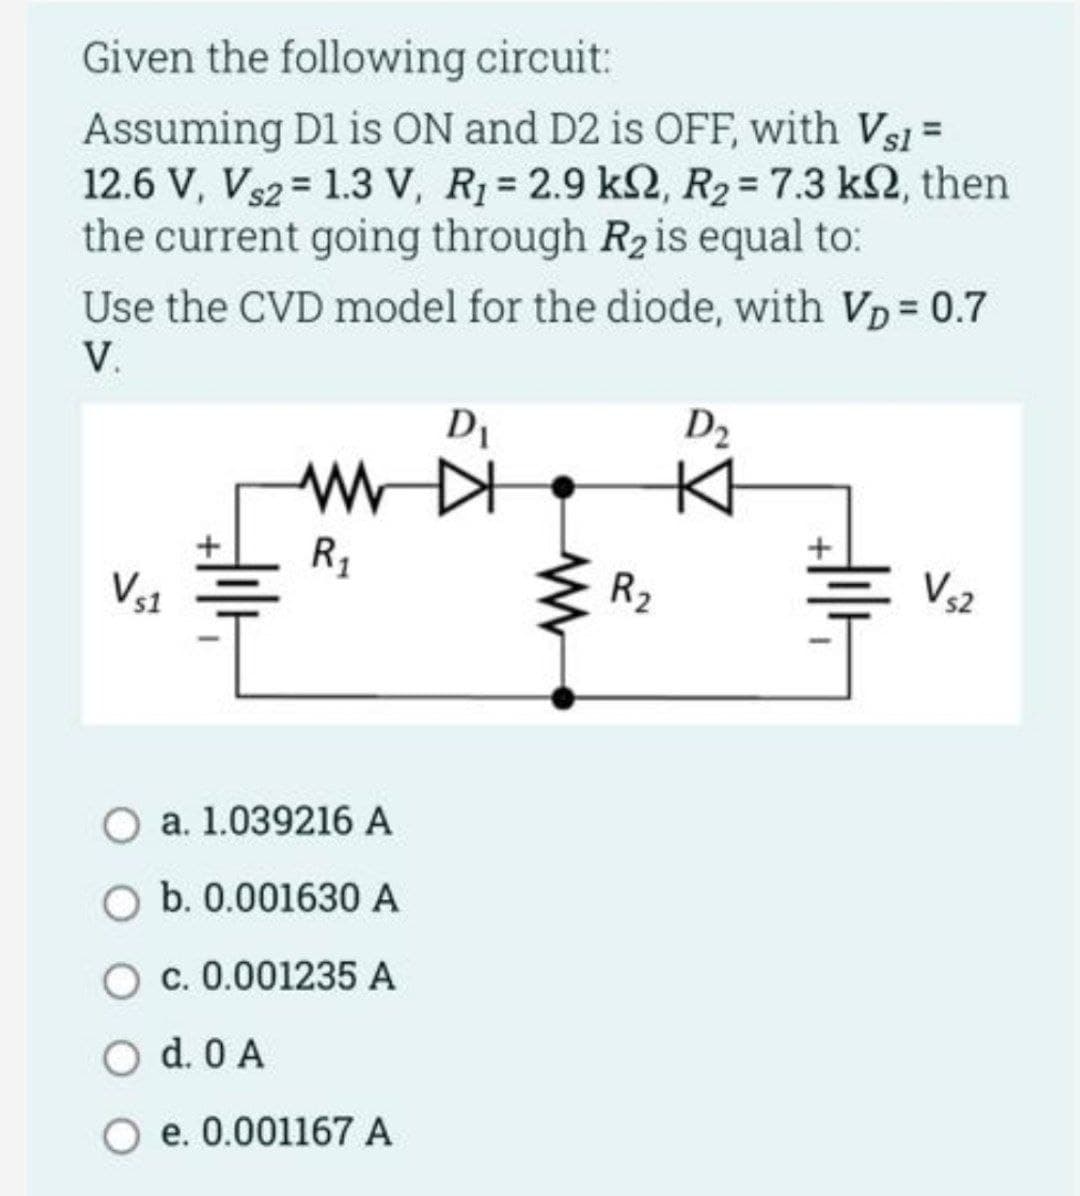 Given the following circuit:
Assuming D1 is ON and D2 is OFF, with Vs1 =
12.6 V, Vs2 = 1.3 V, R₁ = 2.9 k2, R₂ = 7.3 k2, then
the current going through R₂ is equal to:
Use the CVD model for the diode, with VD = 0.7
V.
D₁
WWD
R₁
a. 1.039216 A
O b. 0.001630 A
O c. 0.001235 A
O d. 0 A
e. 0.001167 A
www
R₂
D₂
V₁2